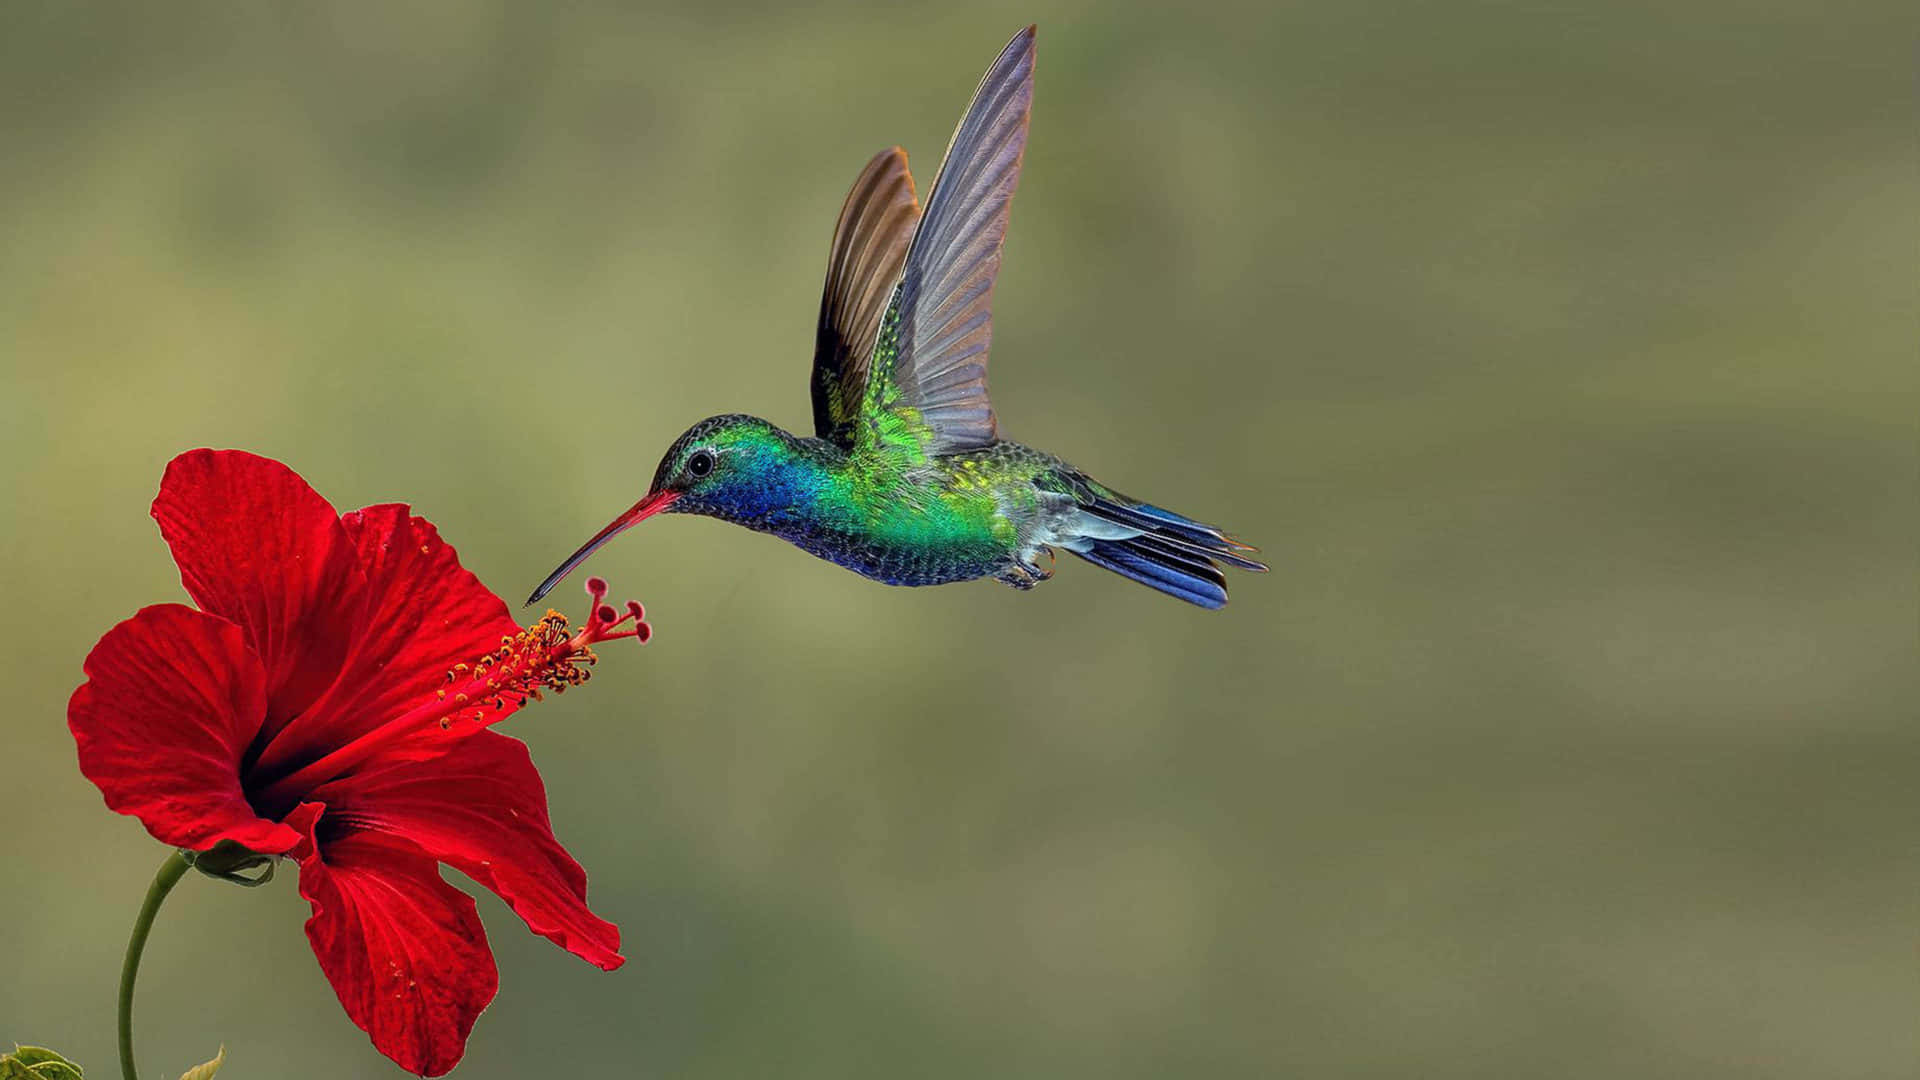 Collecting nectar from a beautiful flower, this tiny hummingbird delights us all with its vibrant colors.